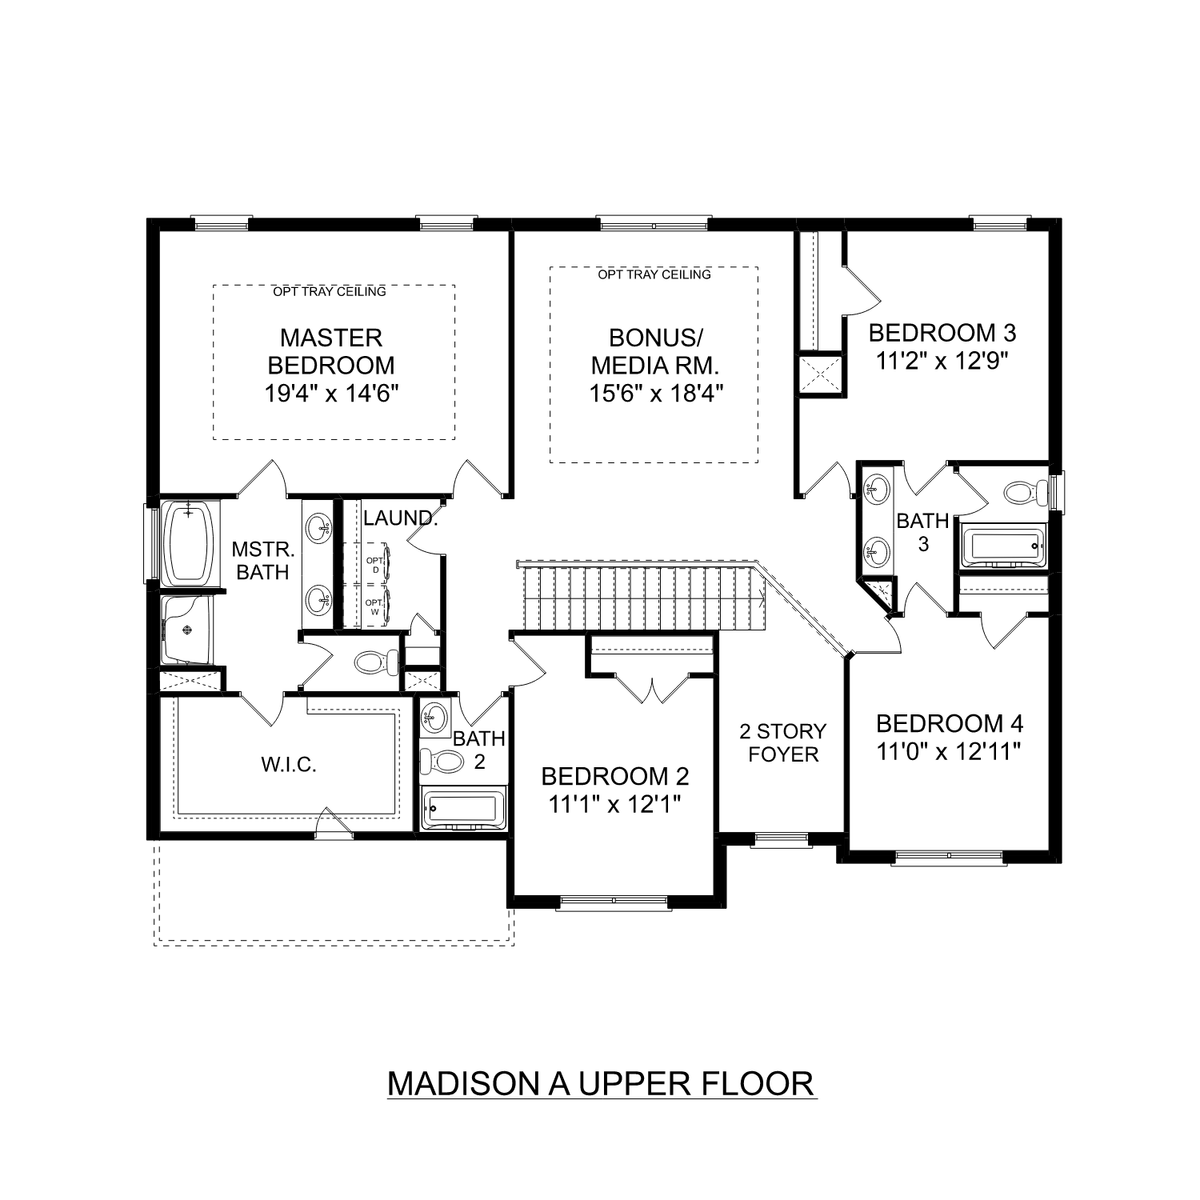 2 - The Madison A floor plan layout for 225 White Horse Way in Davidson Homes' Kendall Downs community.